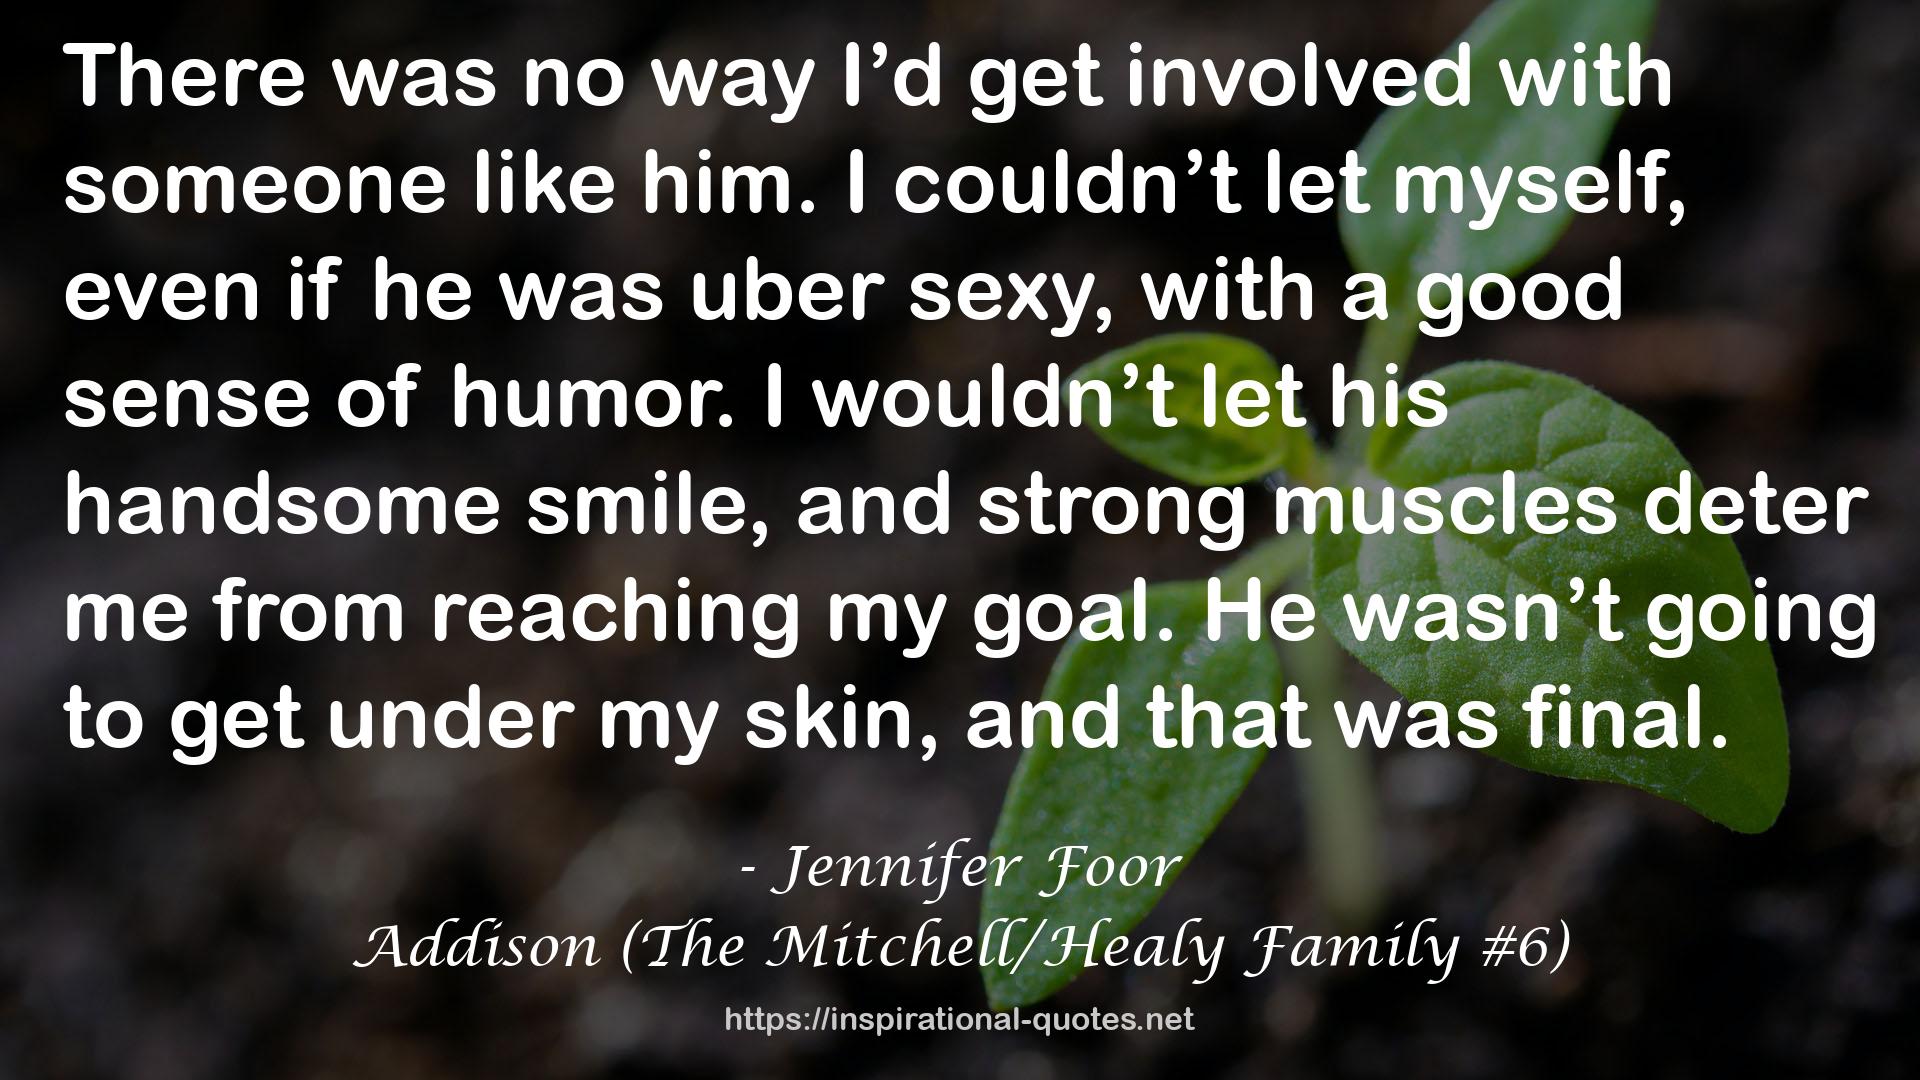 Addison (The Mitchell/Healy Family #6) QUOTES